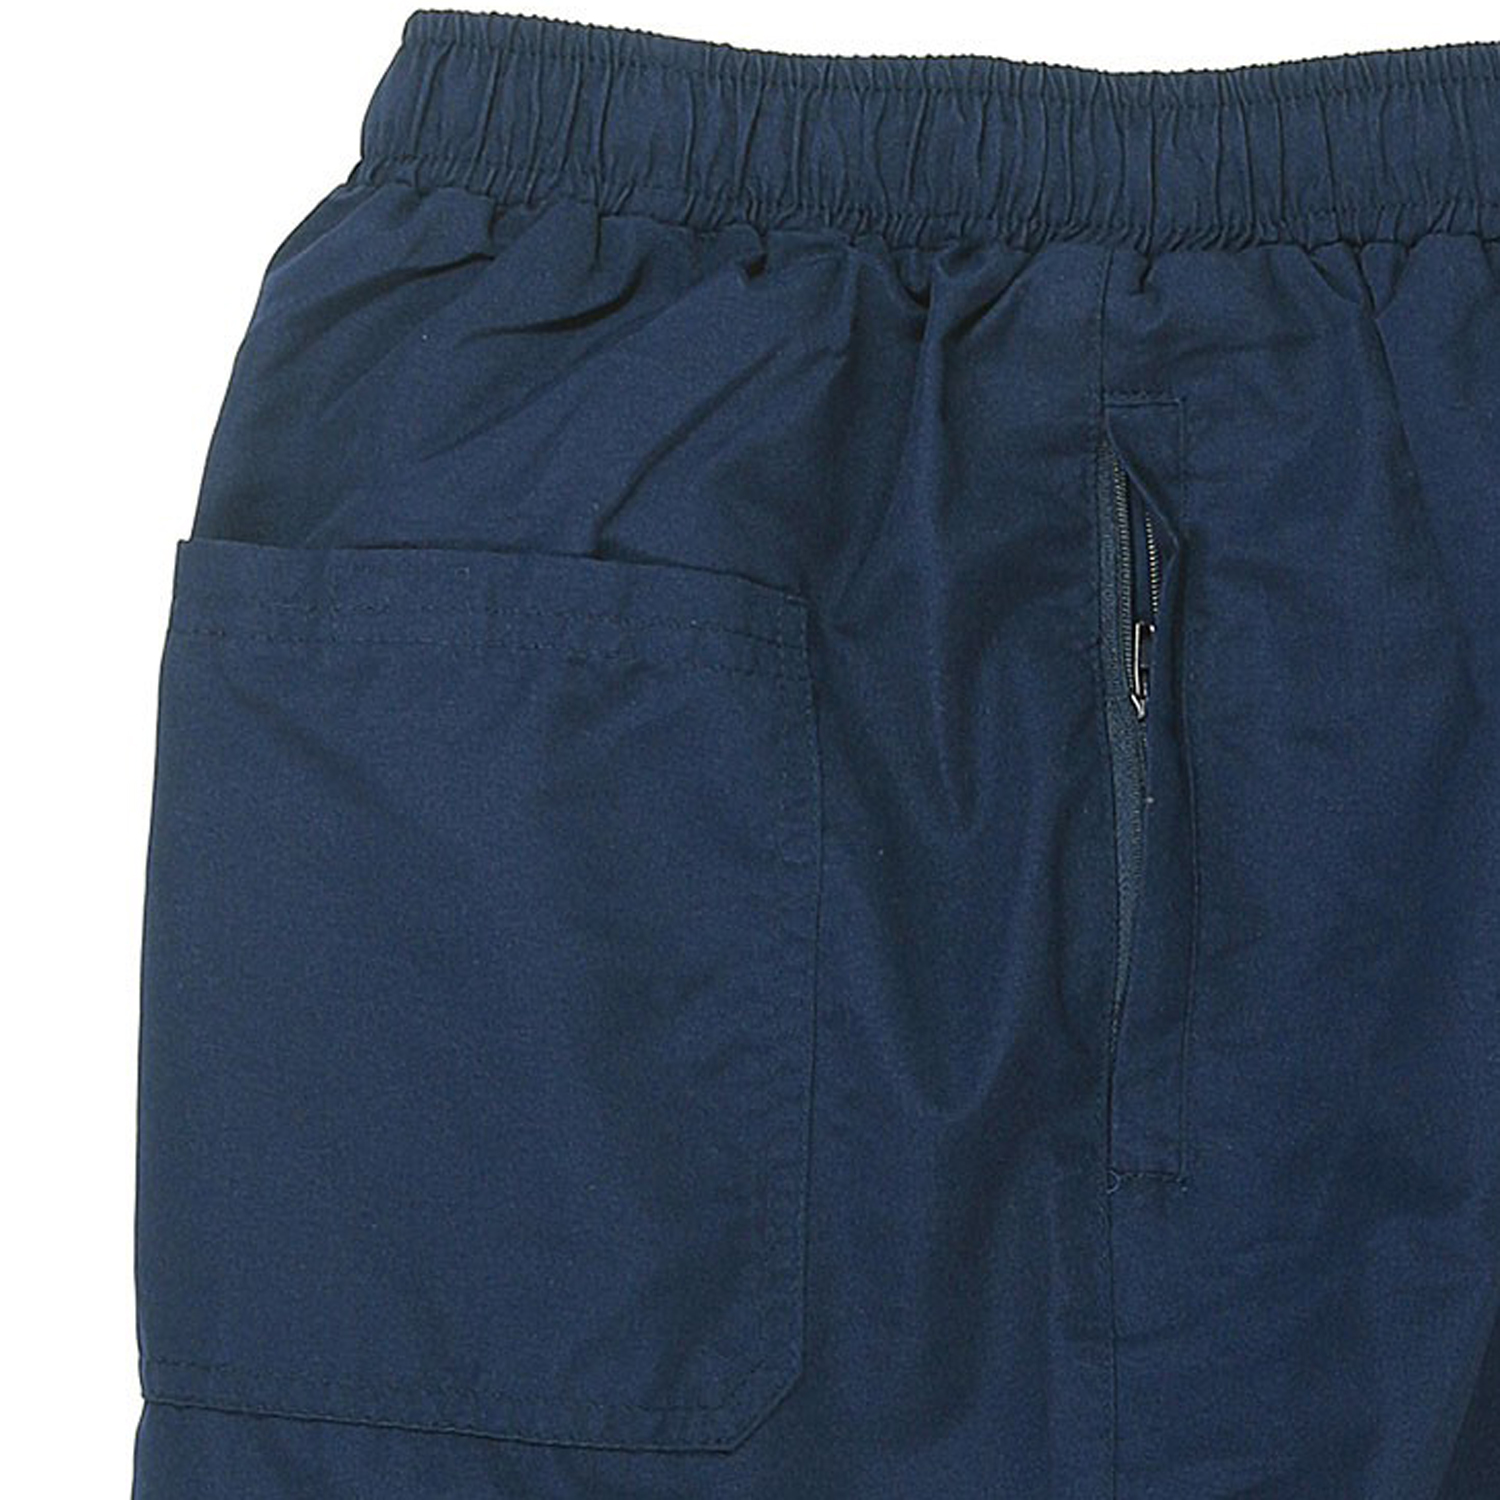 Abraxas swimming trunks in navy up to oversize 10XL